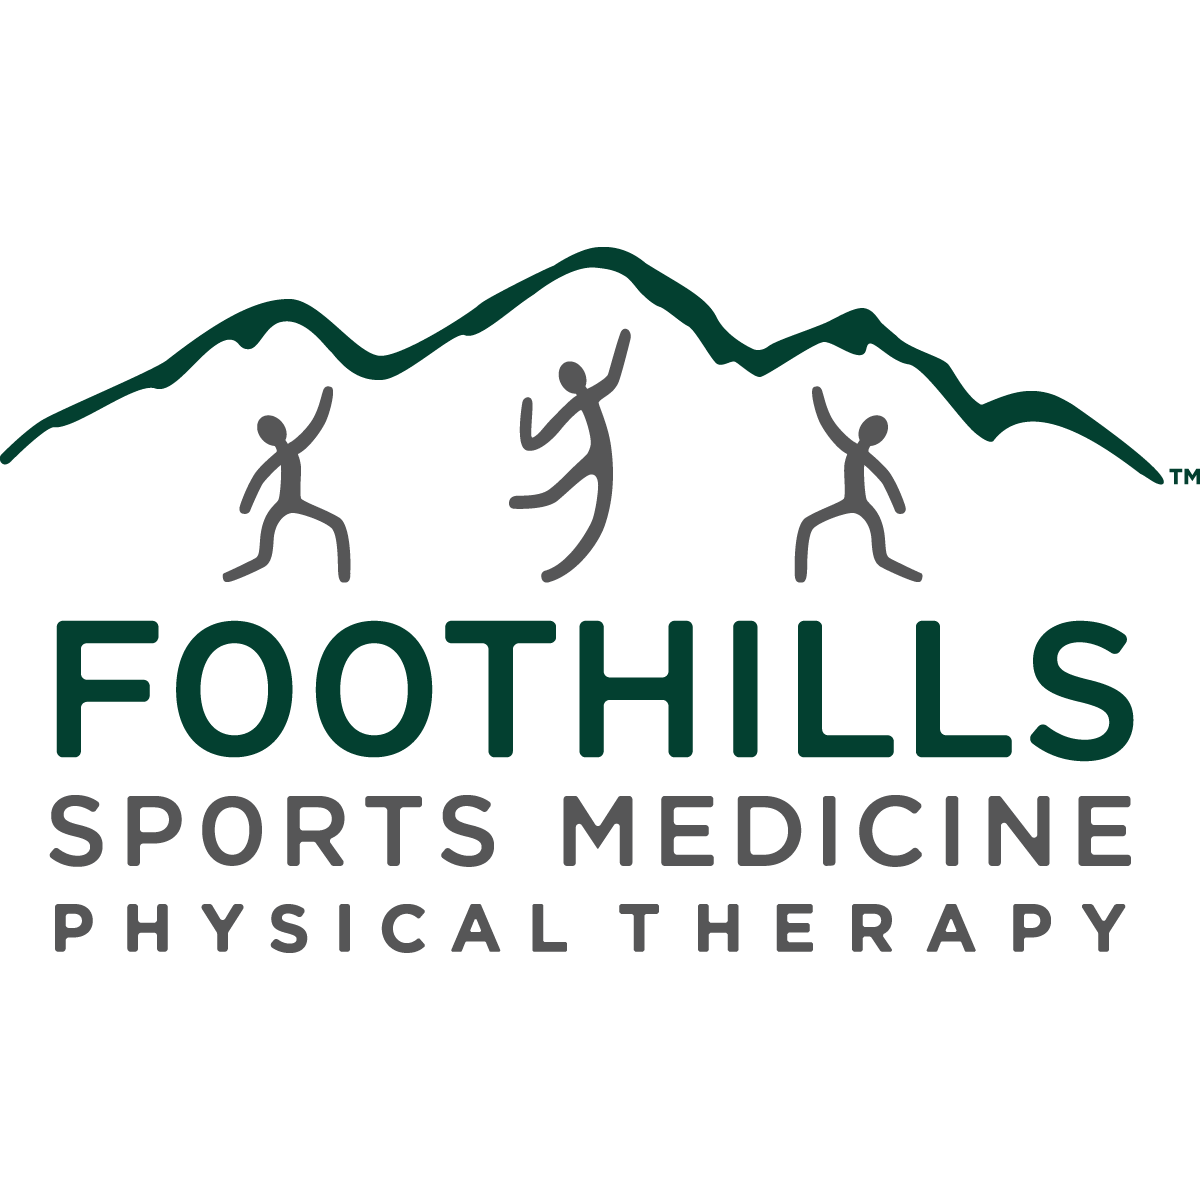 Foothills Physical Therapy & Sports Medicine - Gilbert, AZ 85298 - (480)840-6125 | ShowMeLocal.com